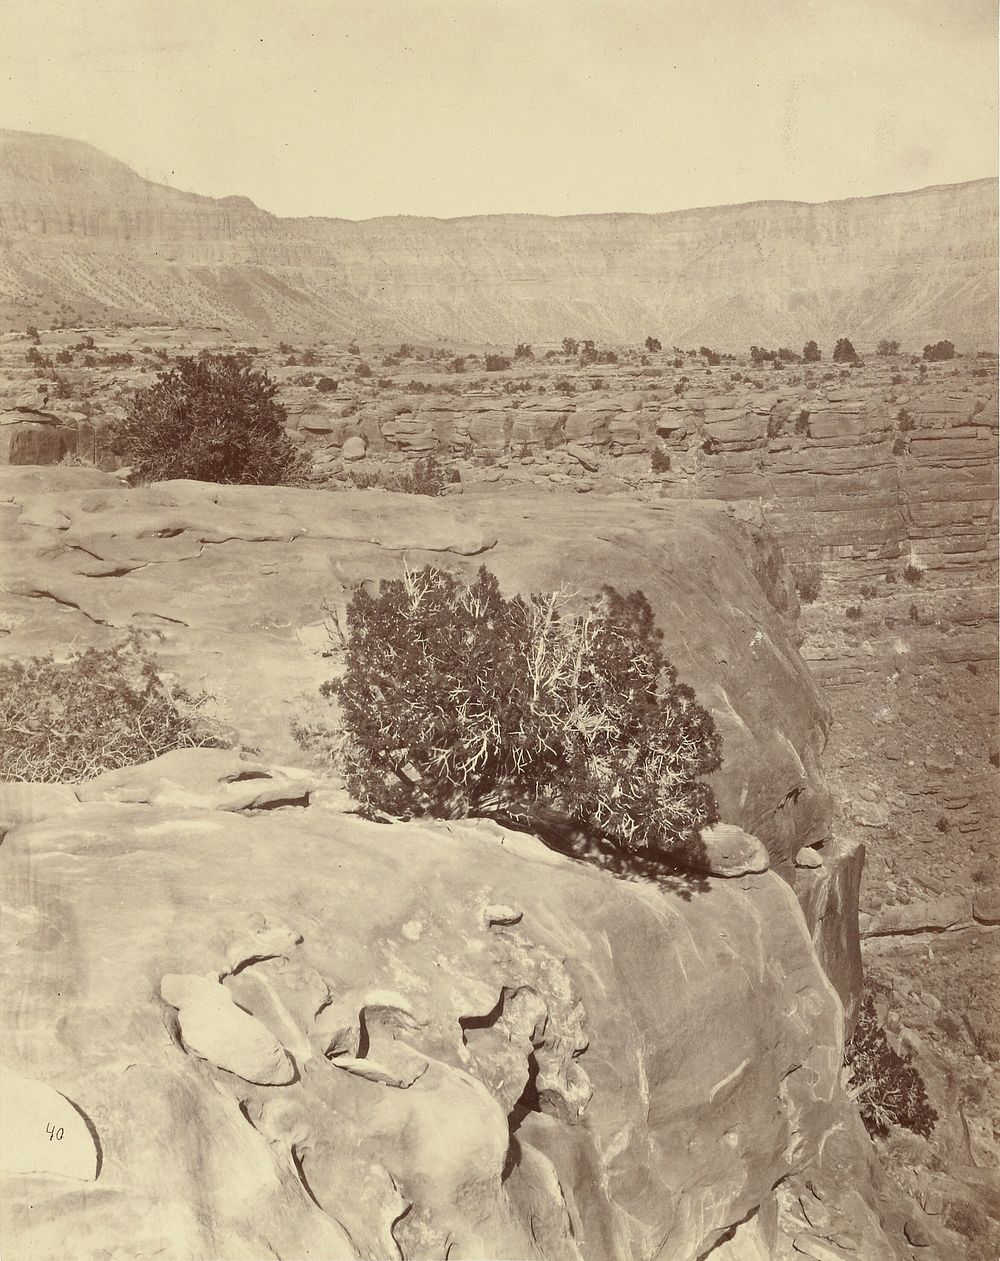 Plateau, North of the Grand Canyon by William H Bell